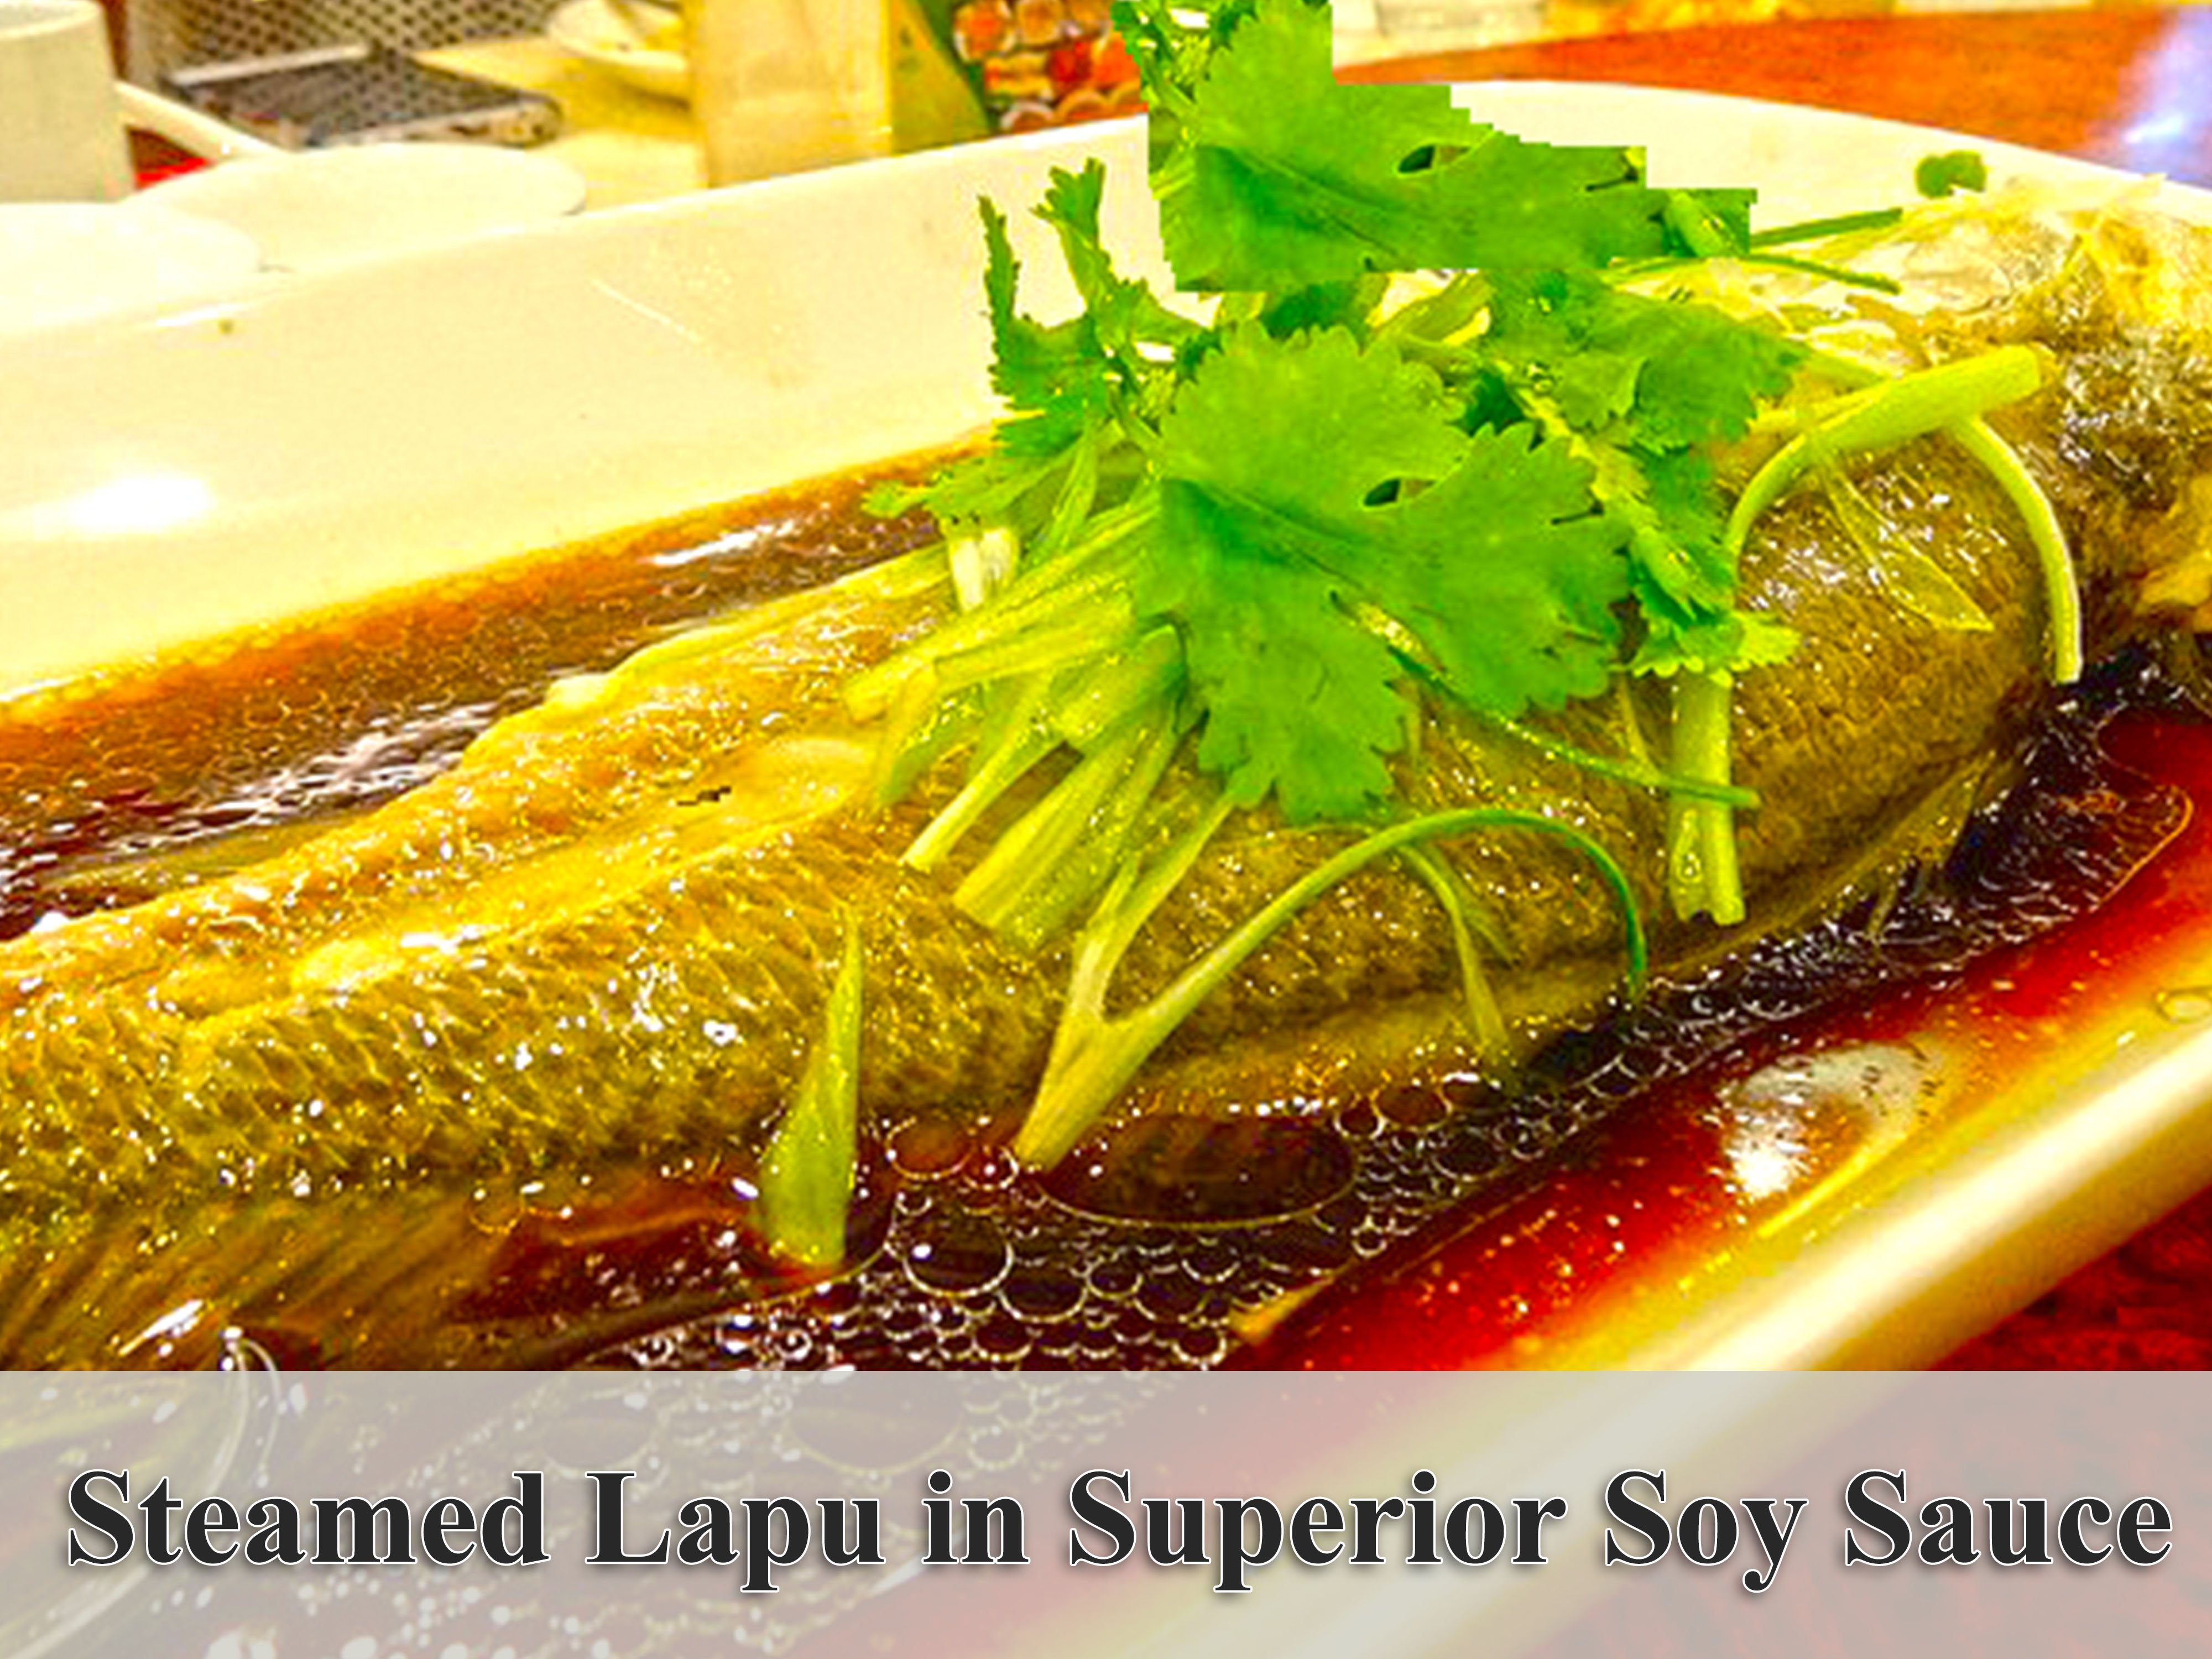 Steamed Lapu in Superior Soy Sauce